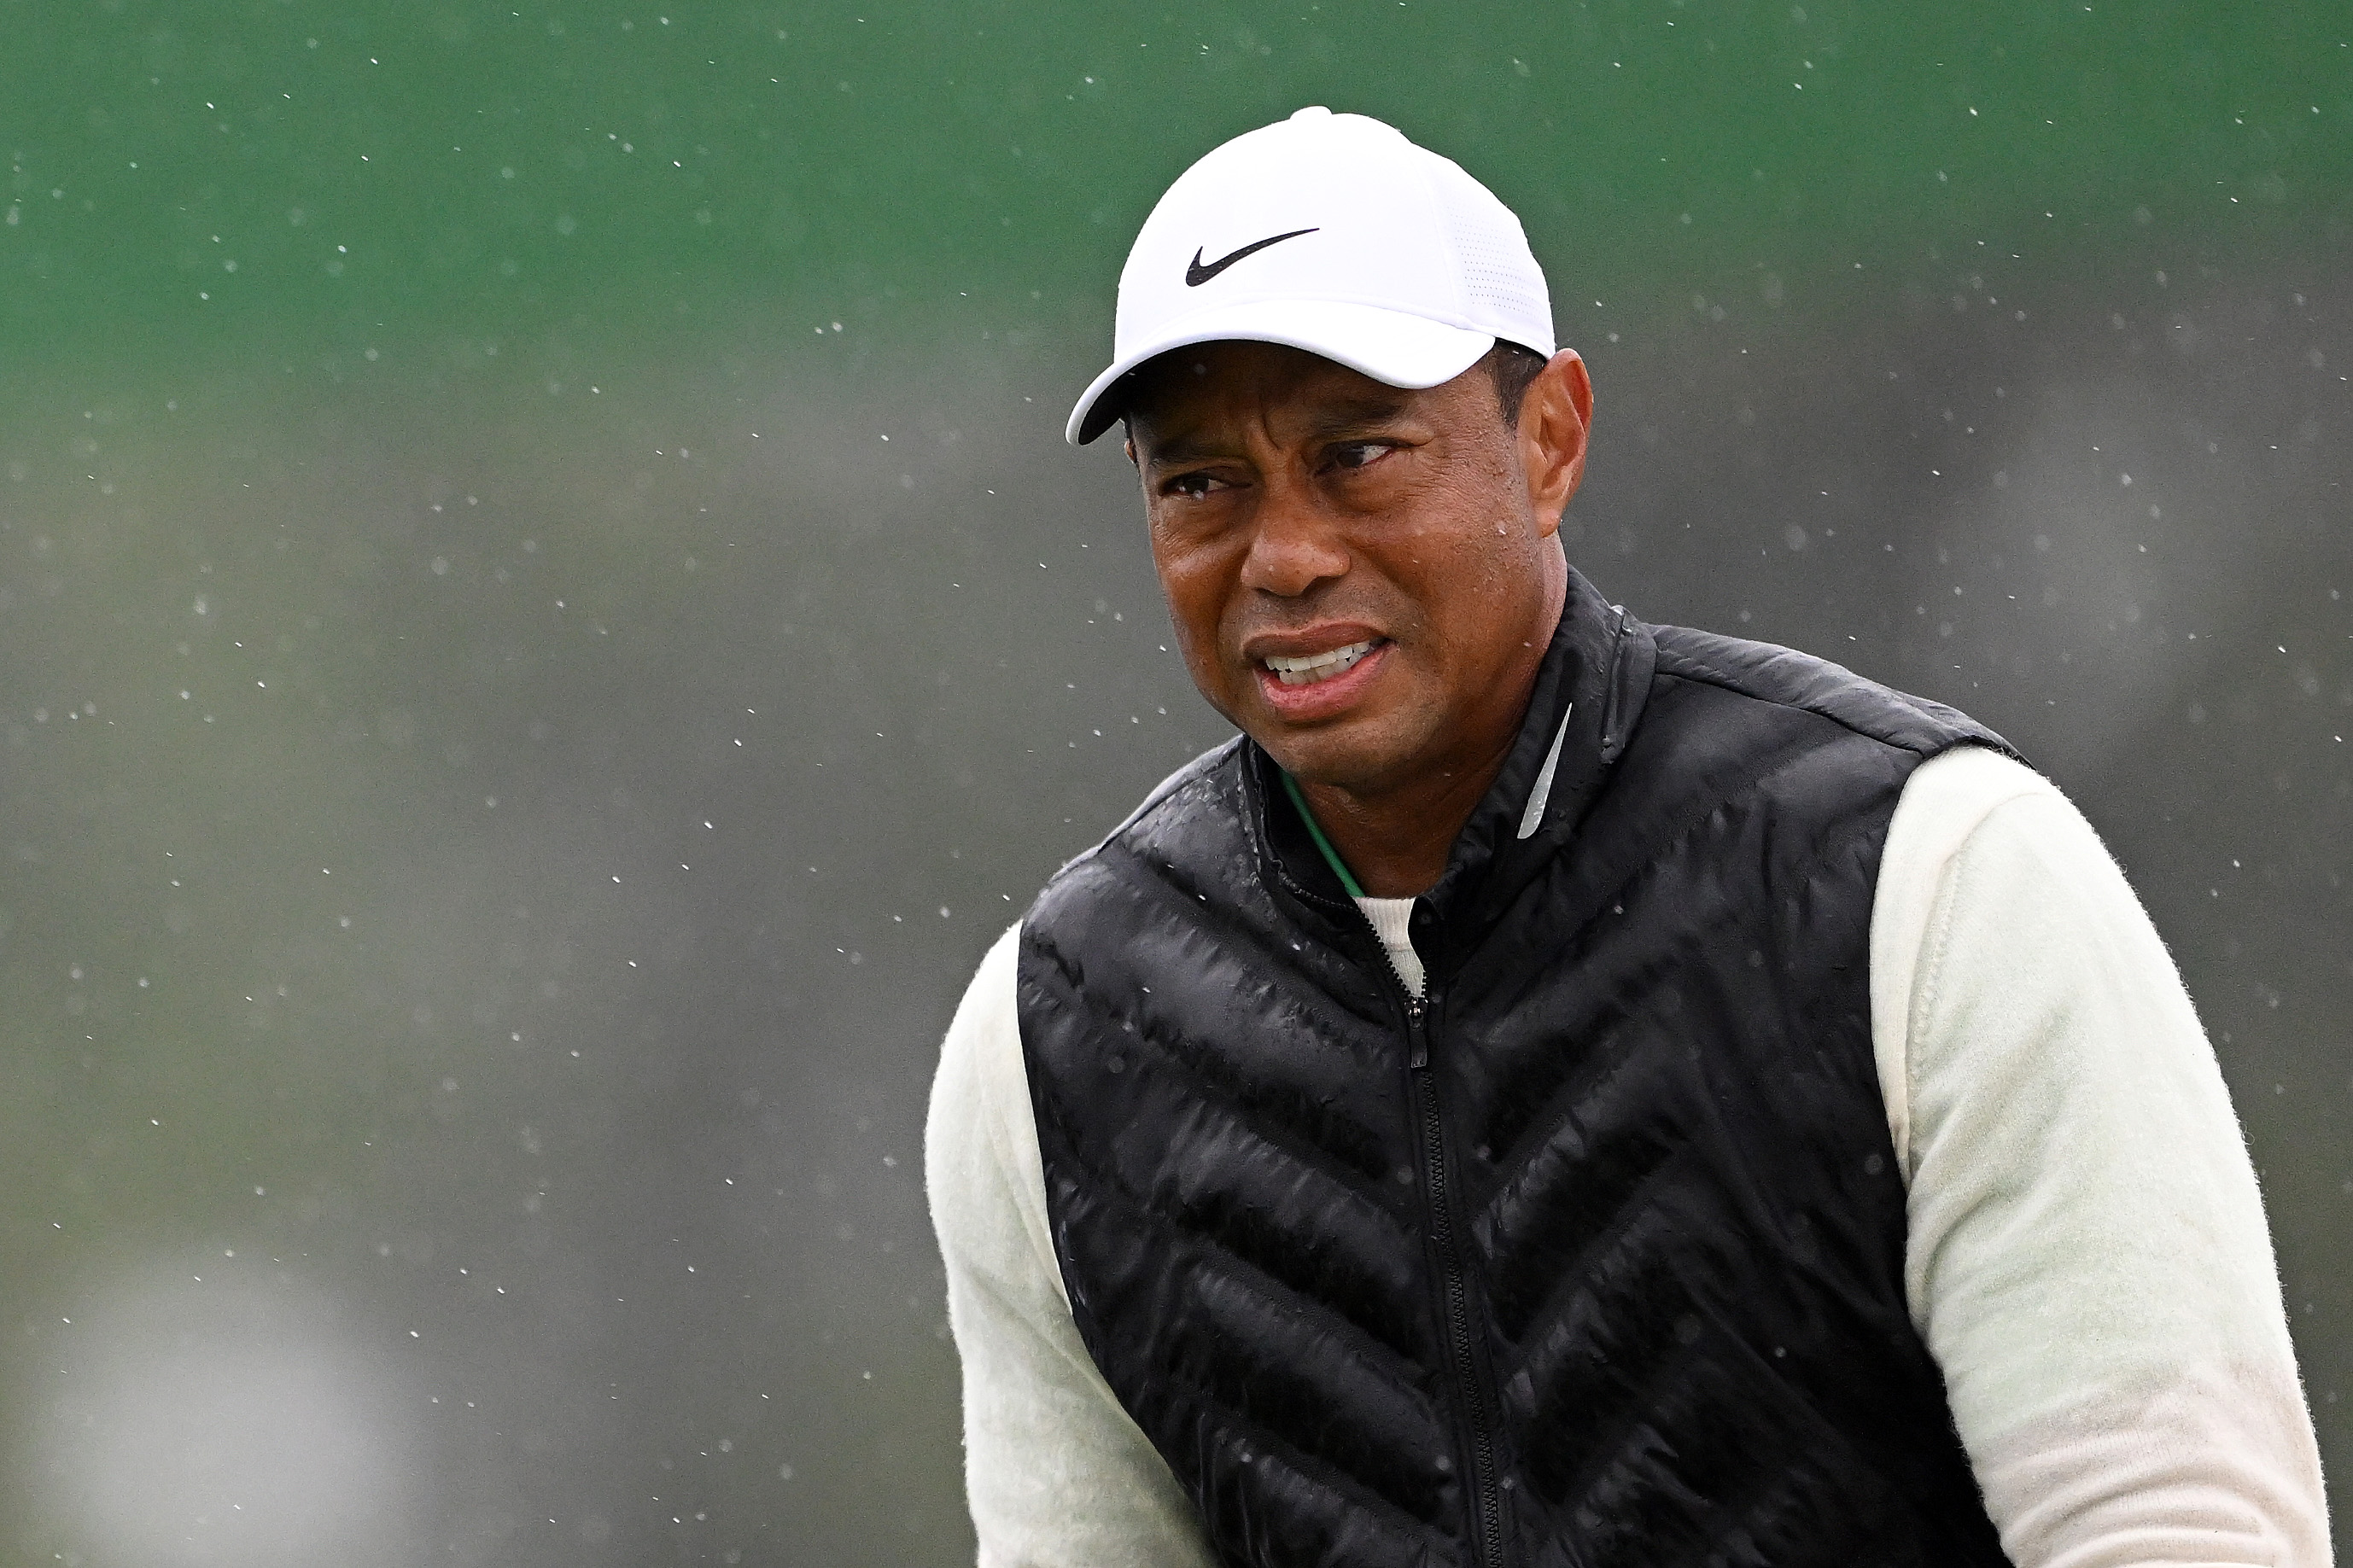 Tiger Woods Withdraws From The Masters Over Injury